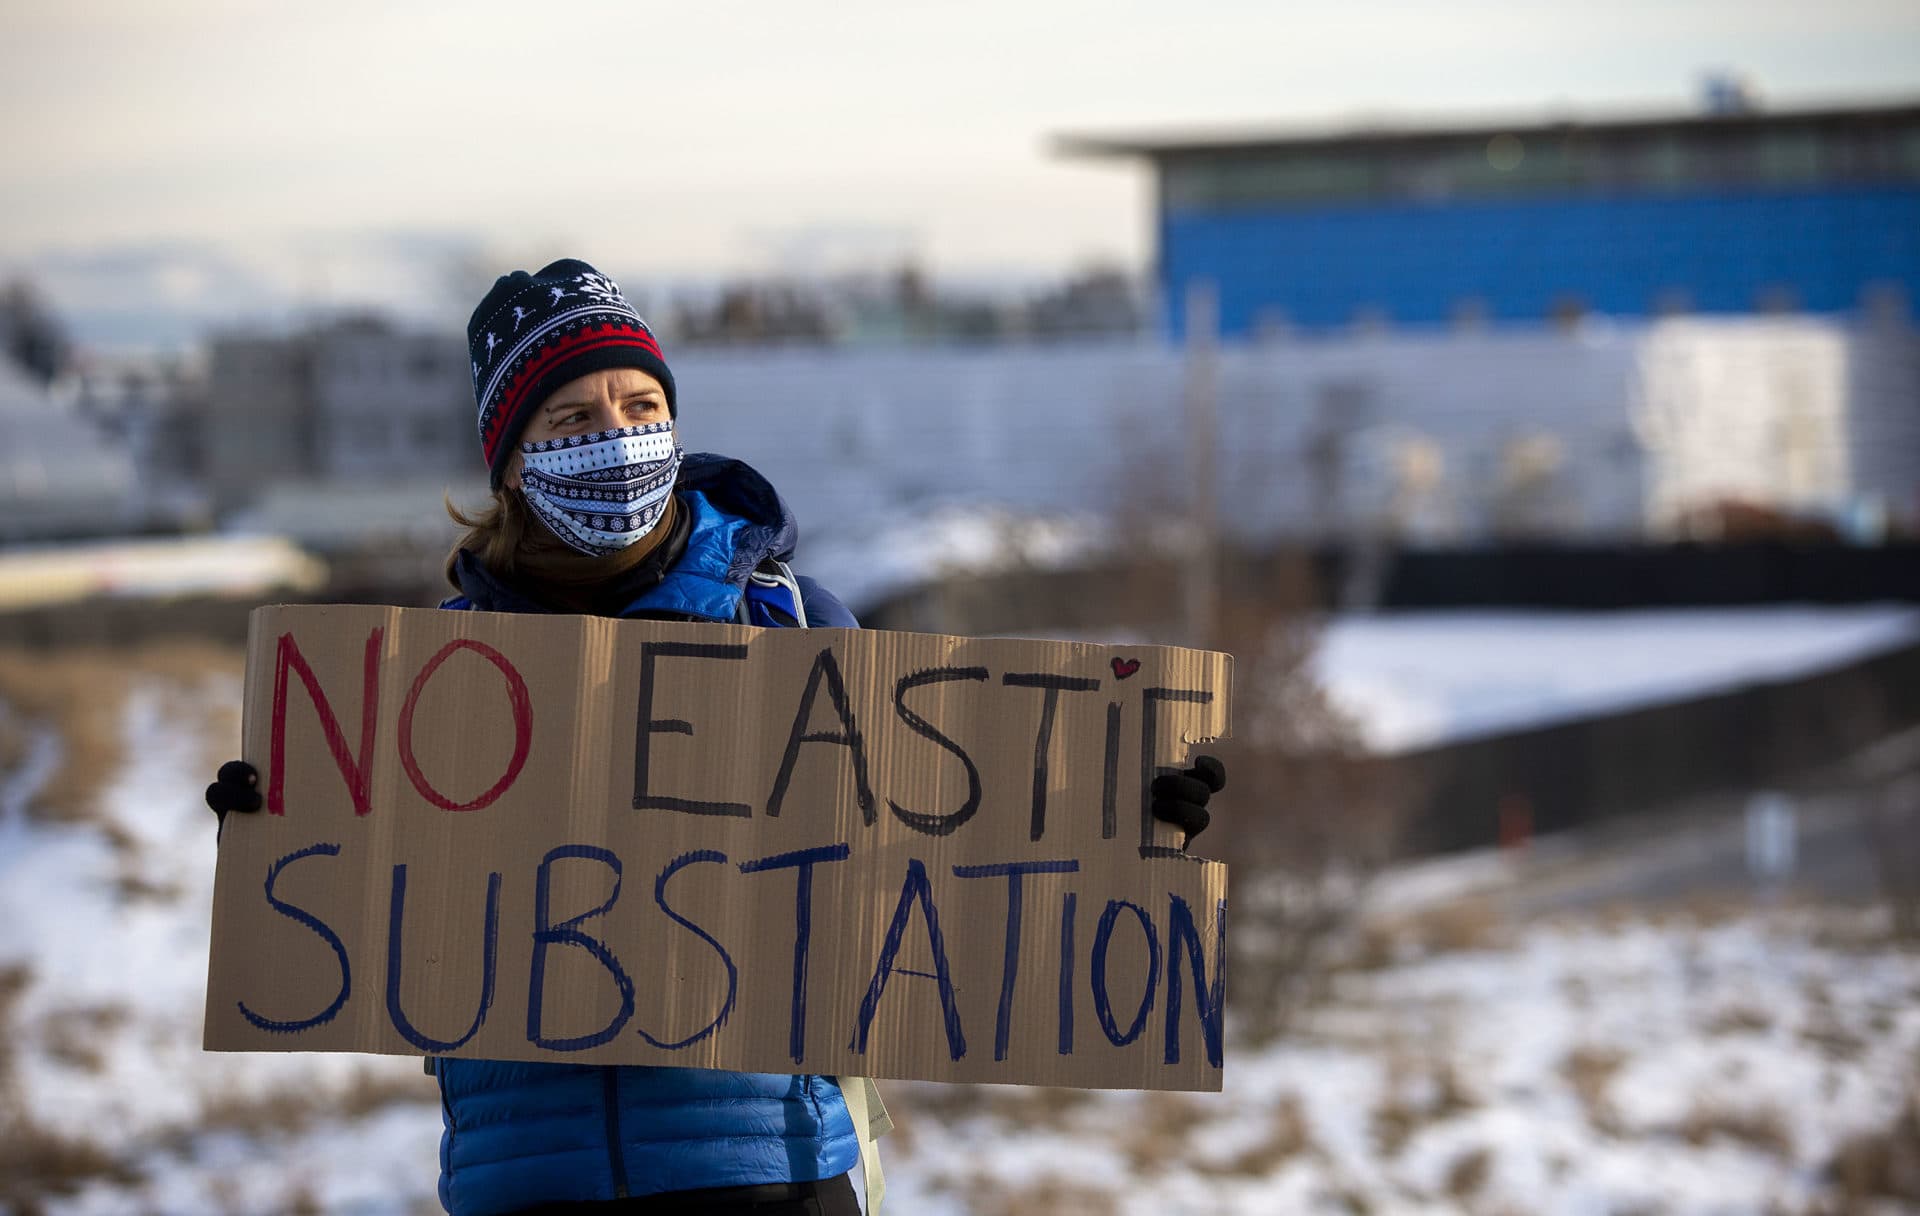 Juliane Manitz carries a "No Eastie Substation" sign at the Extinction Rebellion protest at the Condor Street Urban Wild against the proposed East Boston electrical substation. The proposed site is the fenced, snow covered area behind her. (Robin Lubbock/WBUR)